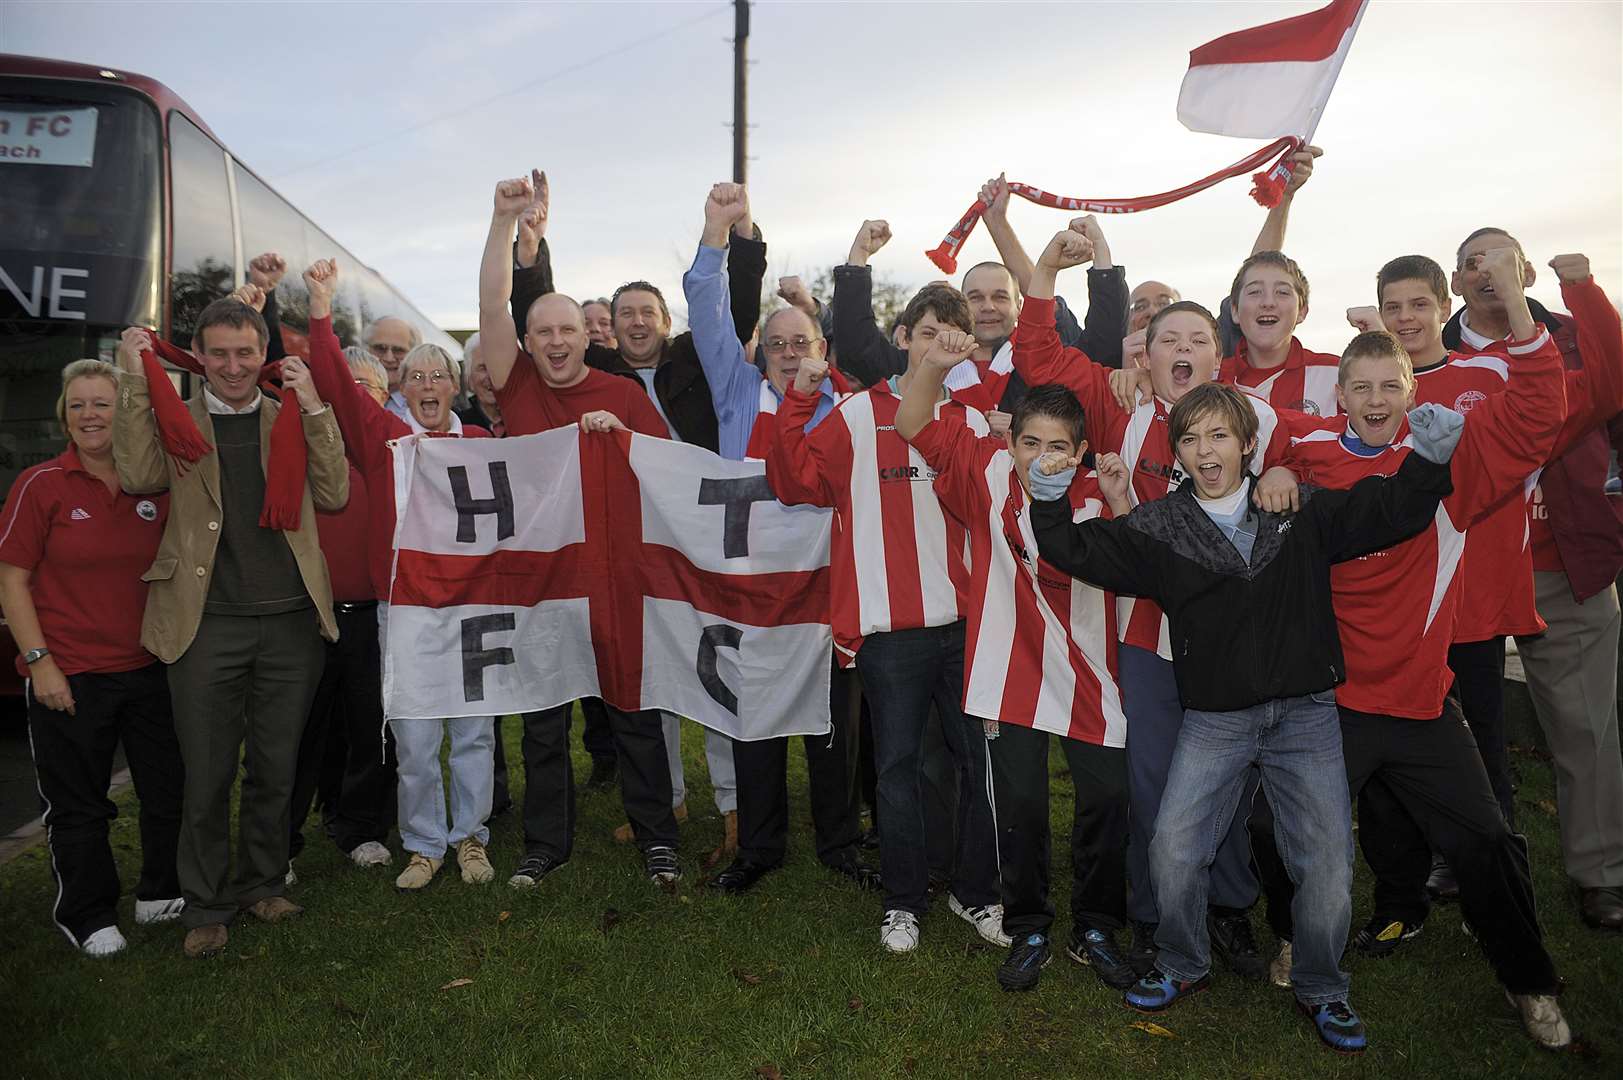 Hythe fans show their support ahead of their match at Hereford in the FA Cup Picture: Barry Goodwin